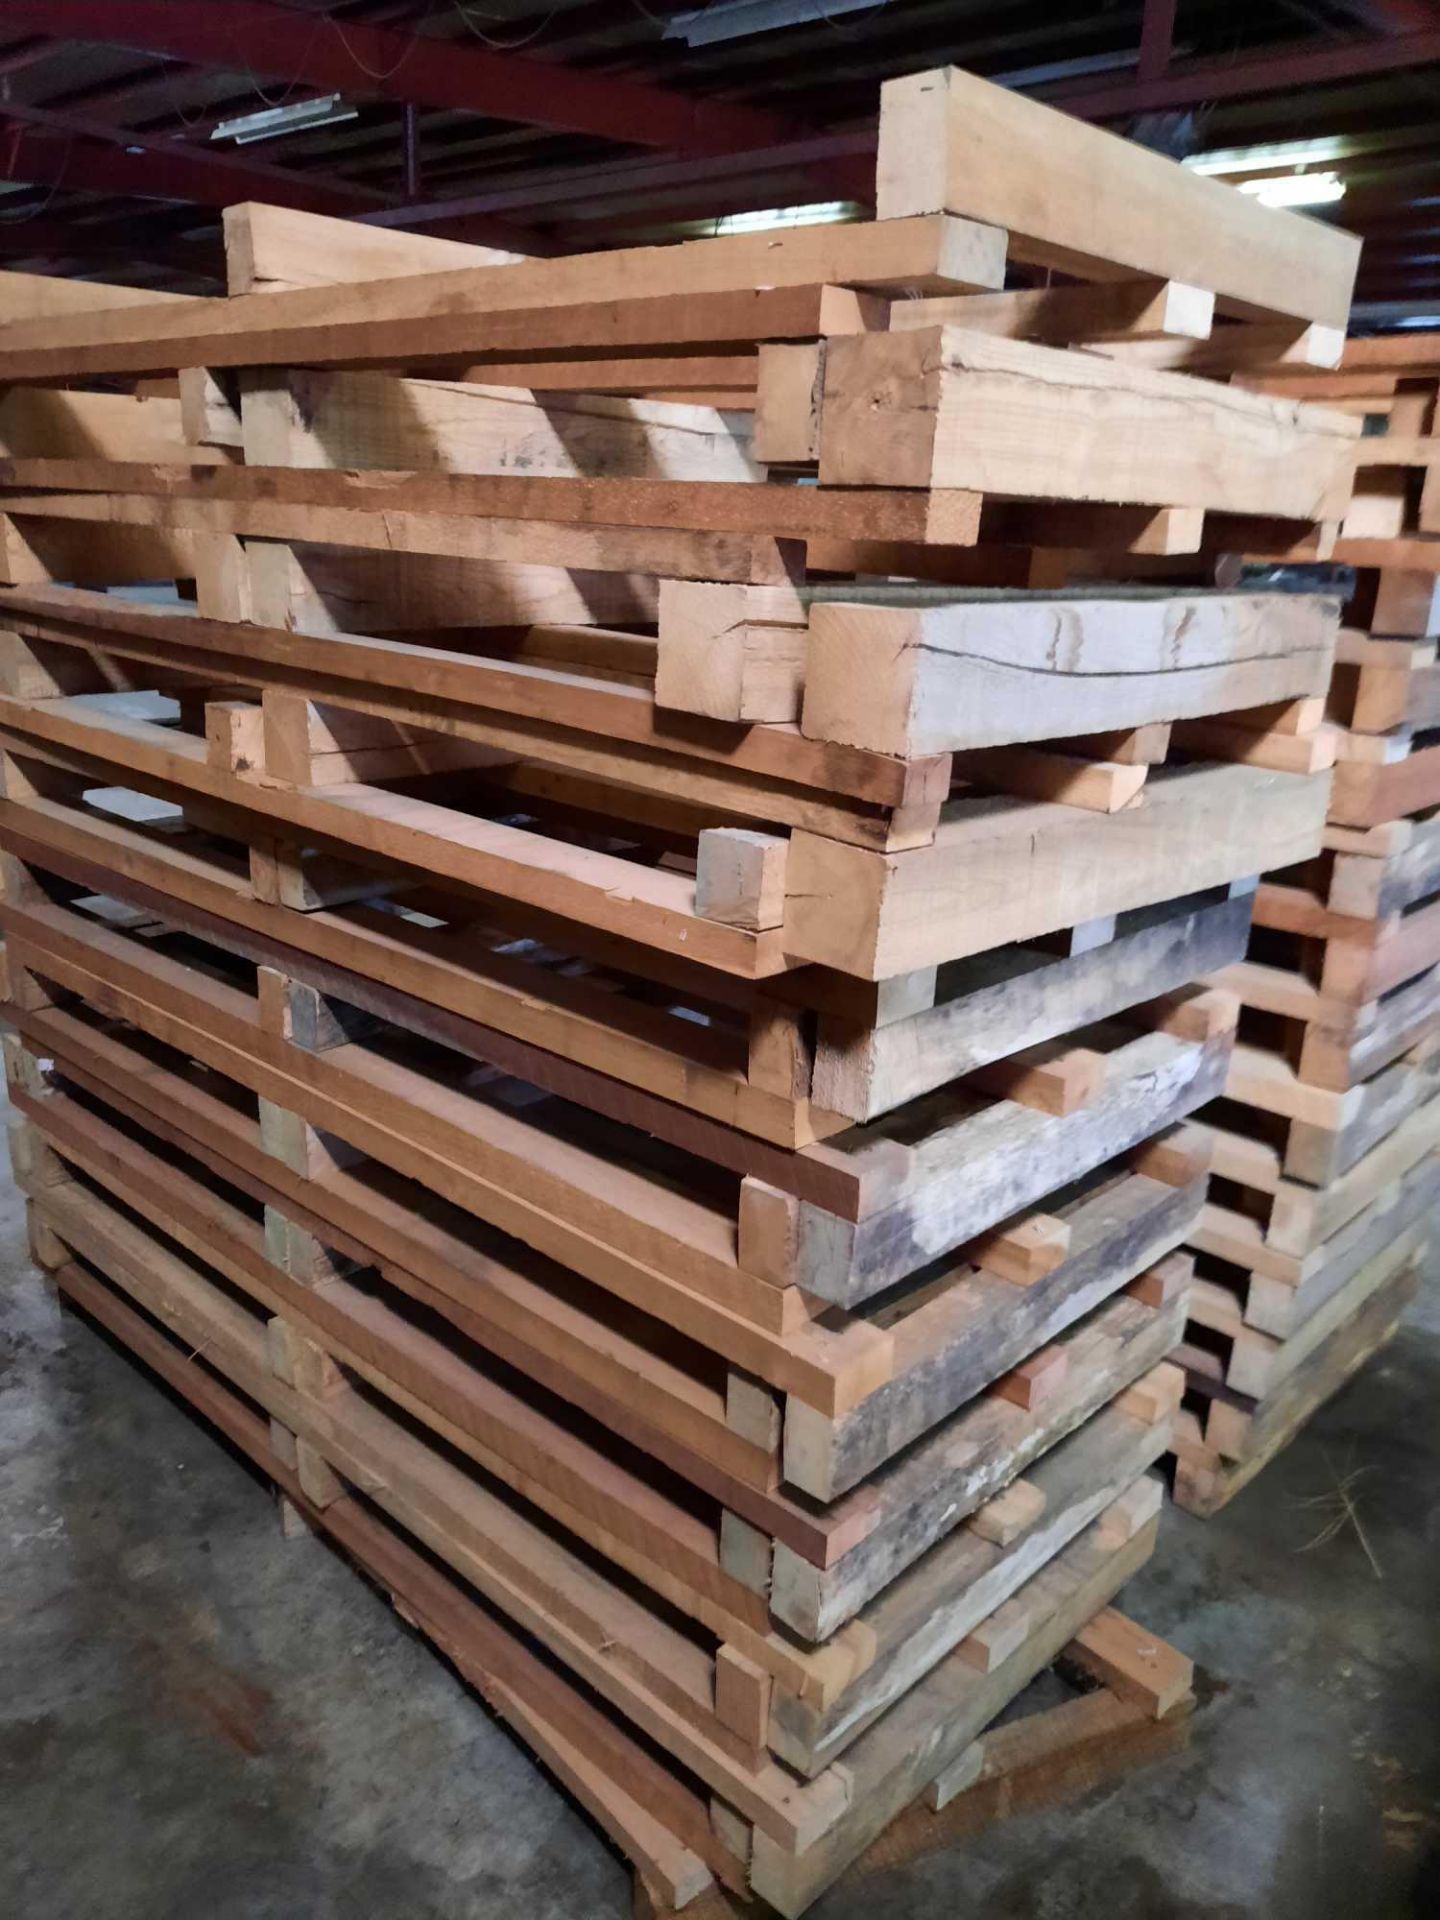 Stacks of pallets, 72 x 30 inches - Image 4 of 4